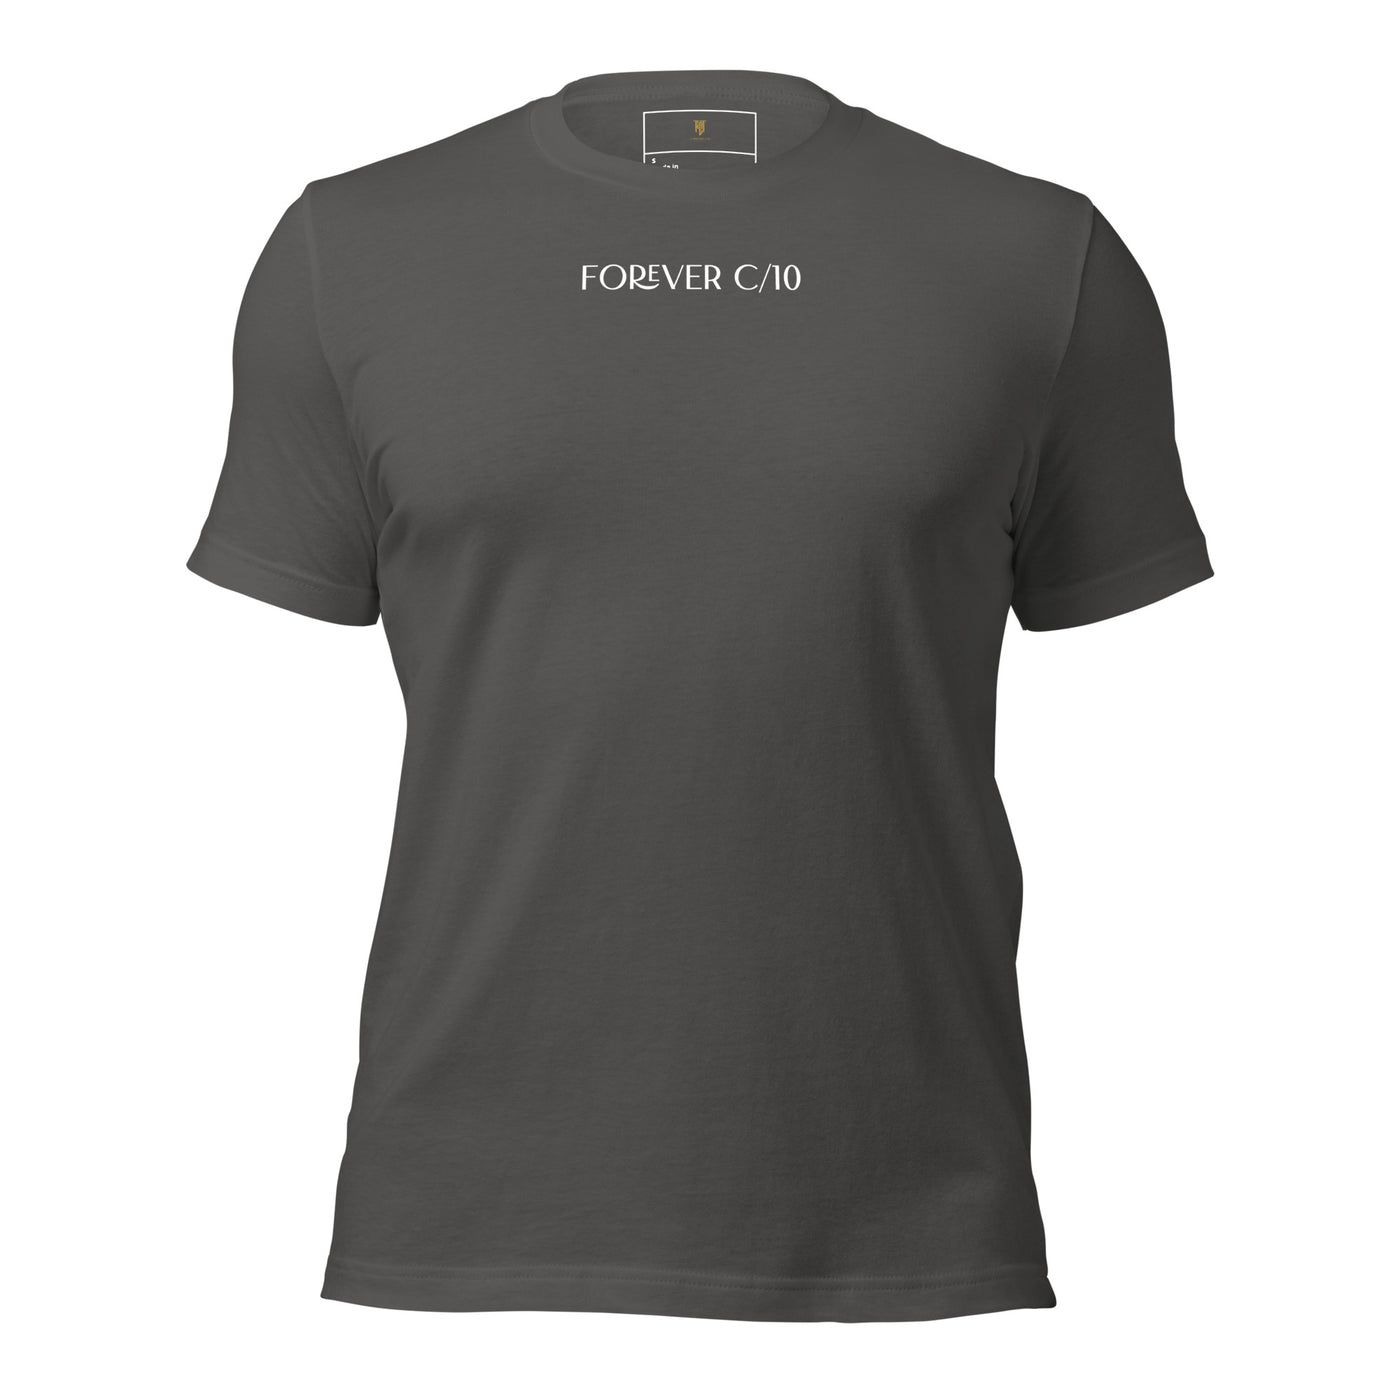 The Gen 2 Forever  Two-Toned Unisex T-shirt (Back Print); Quality Gender Neutral Apparel, Trendsetting Unisex T-Shirts, Urban Unisex Tees, Classic All-Inclusive T-Shirt